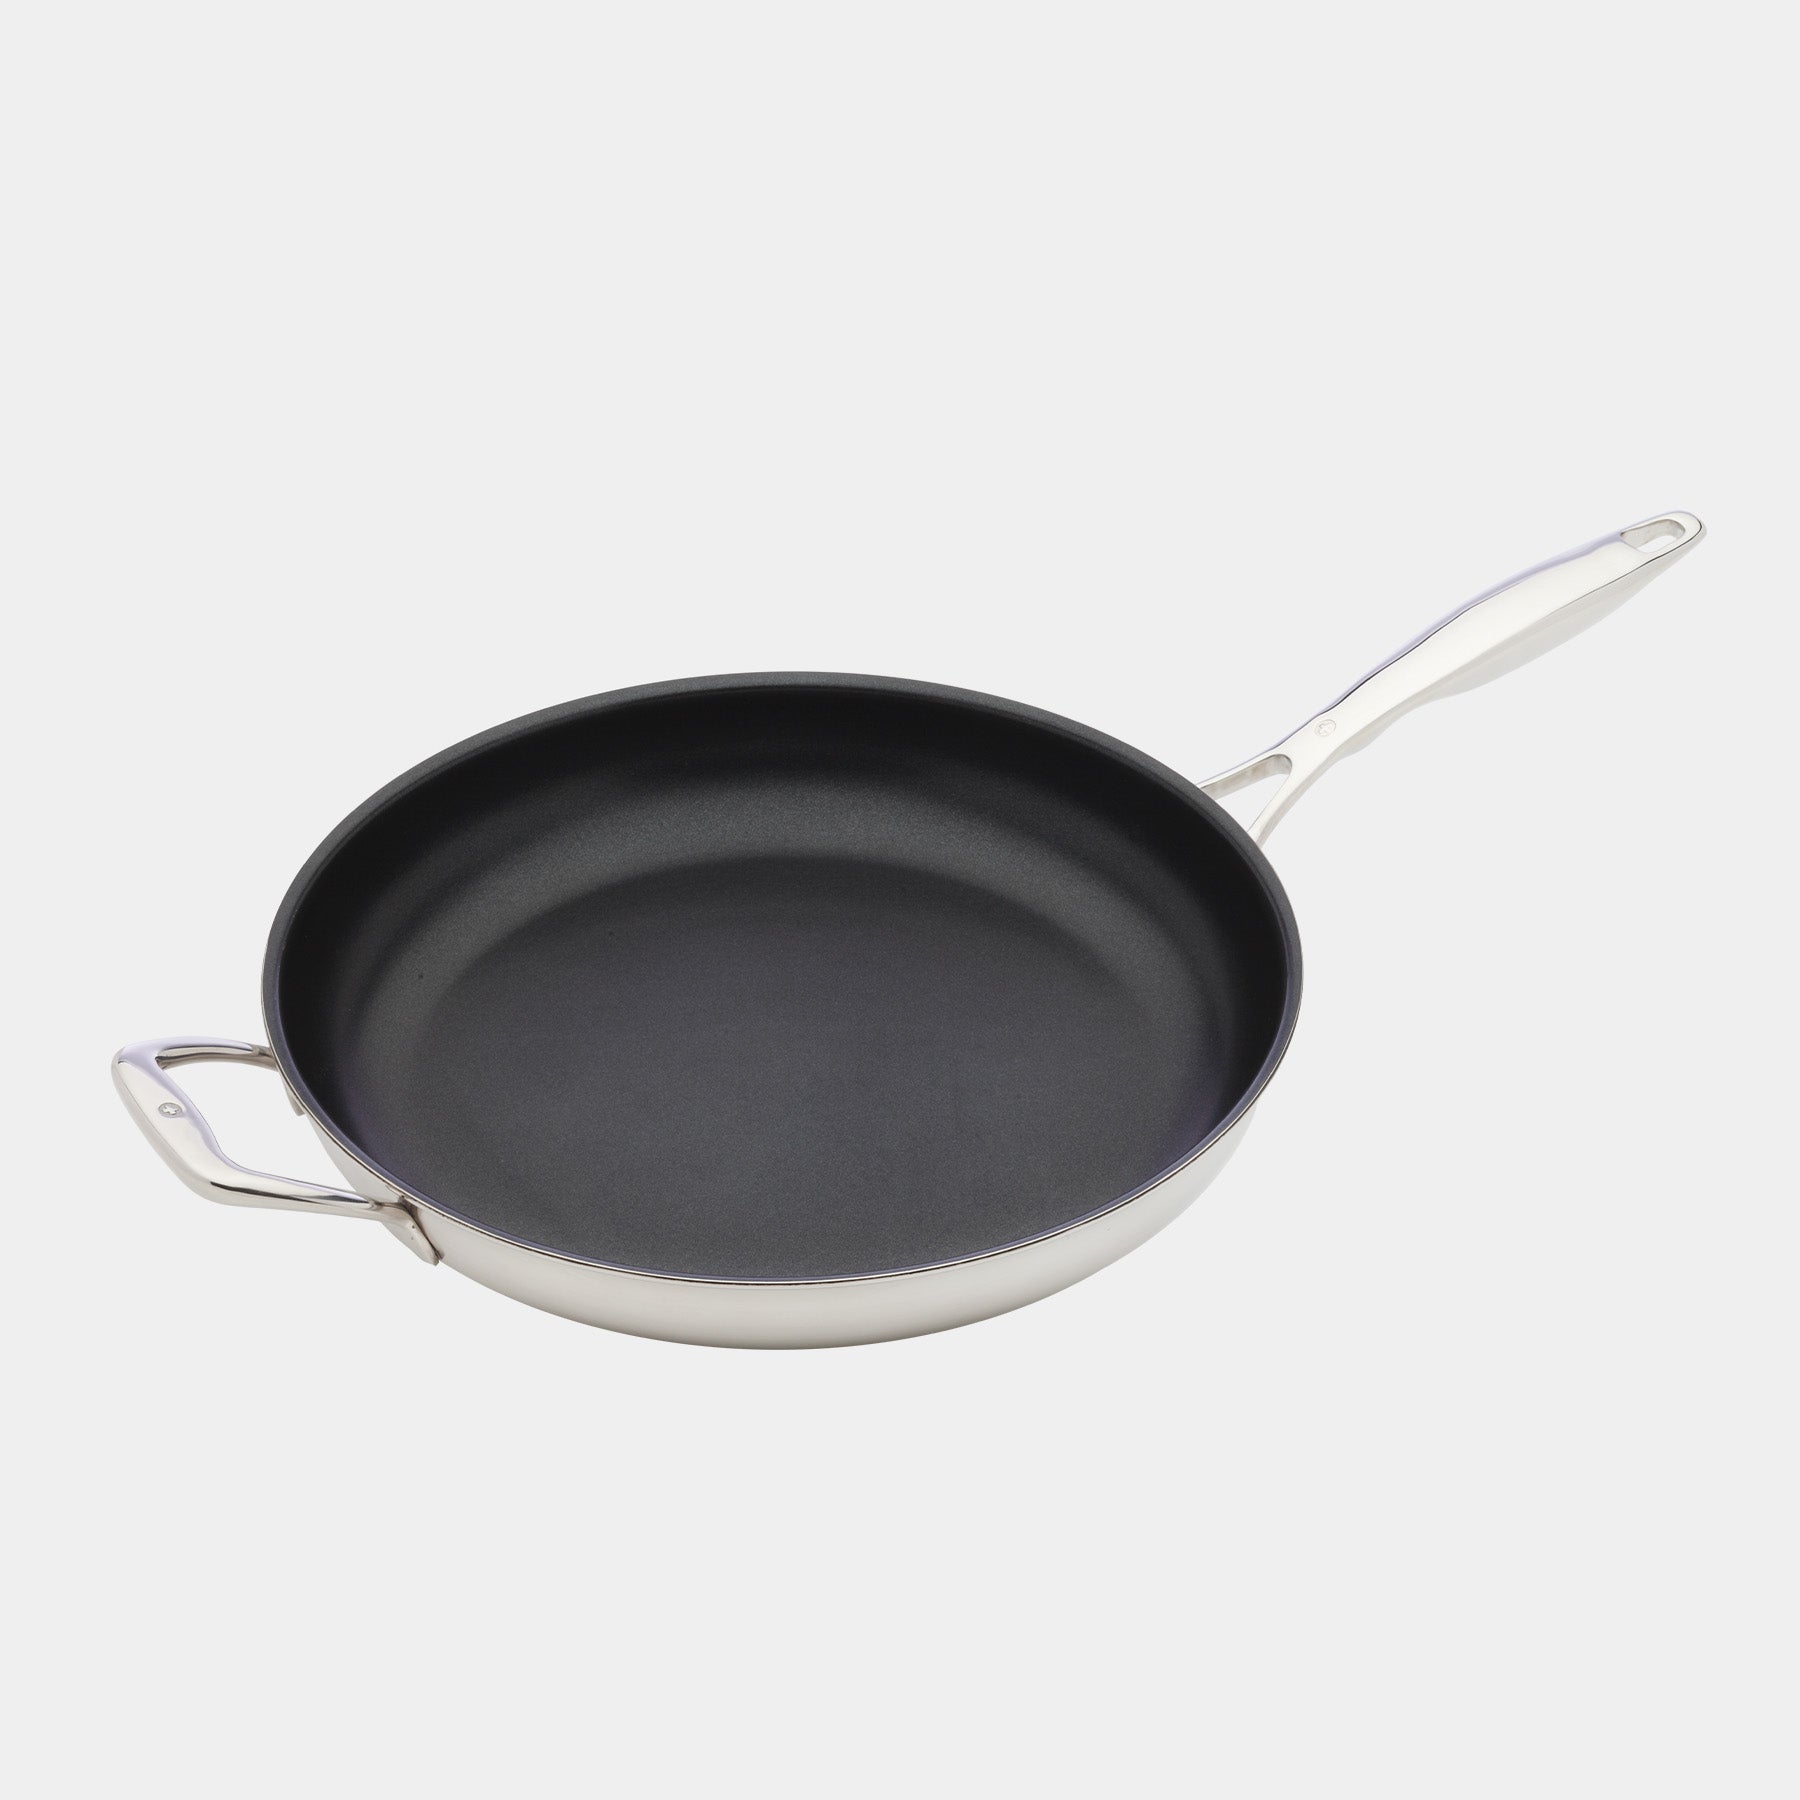 Nonstick Clad 12.5" Fry Pan - Induction